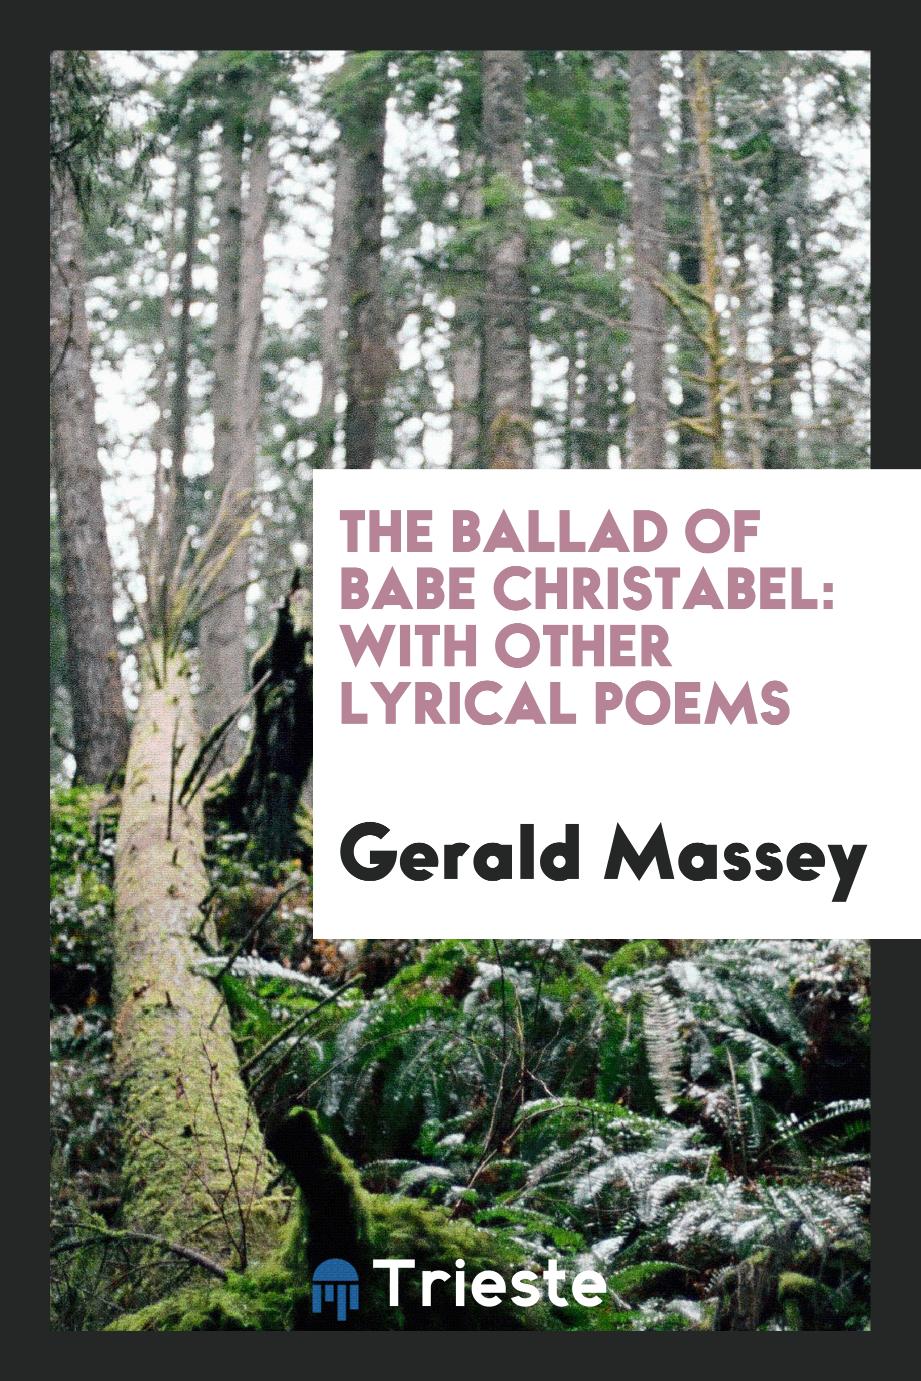 The ballad of Babe Christabel: with other lyrical poems